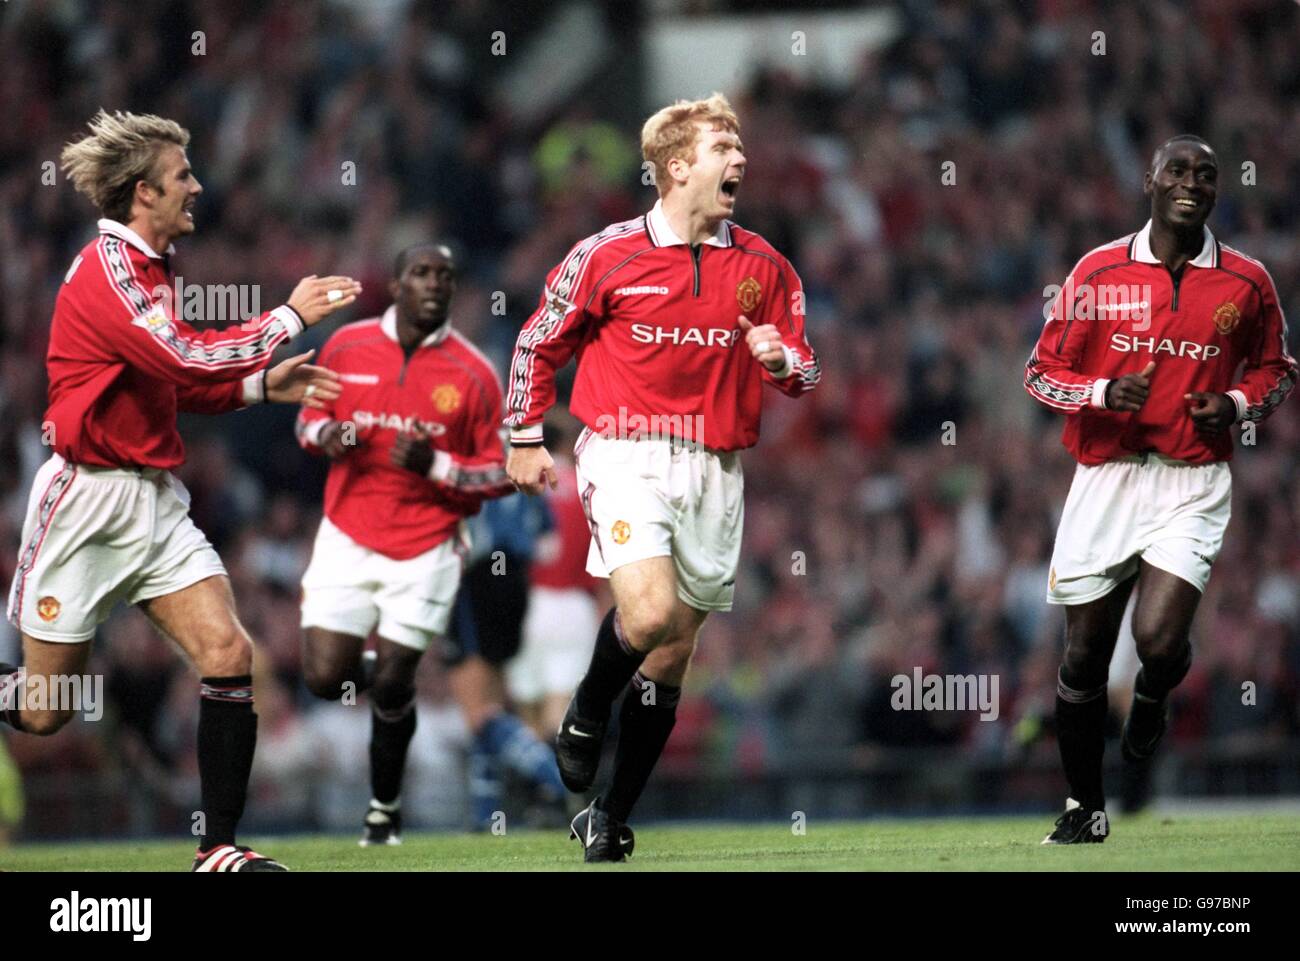 Soccer - FA Carling Premiership - Manchester United v Sheffield Wednesday. Manchester United's Paul Scholes celebrates his goal with David Beckham and Andy Cole against Sheffield Wednesday Stock Photo